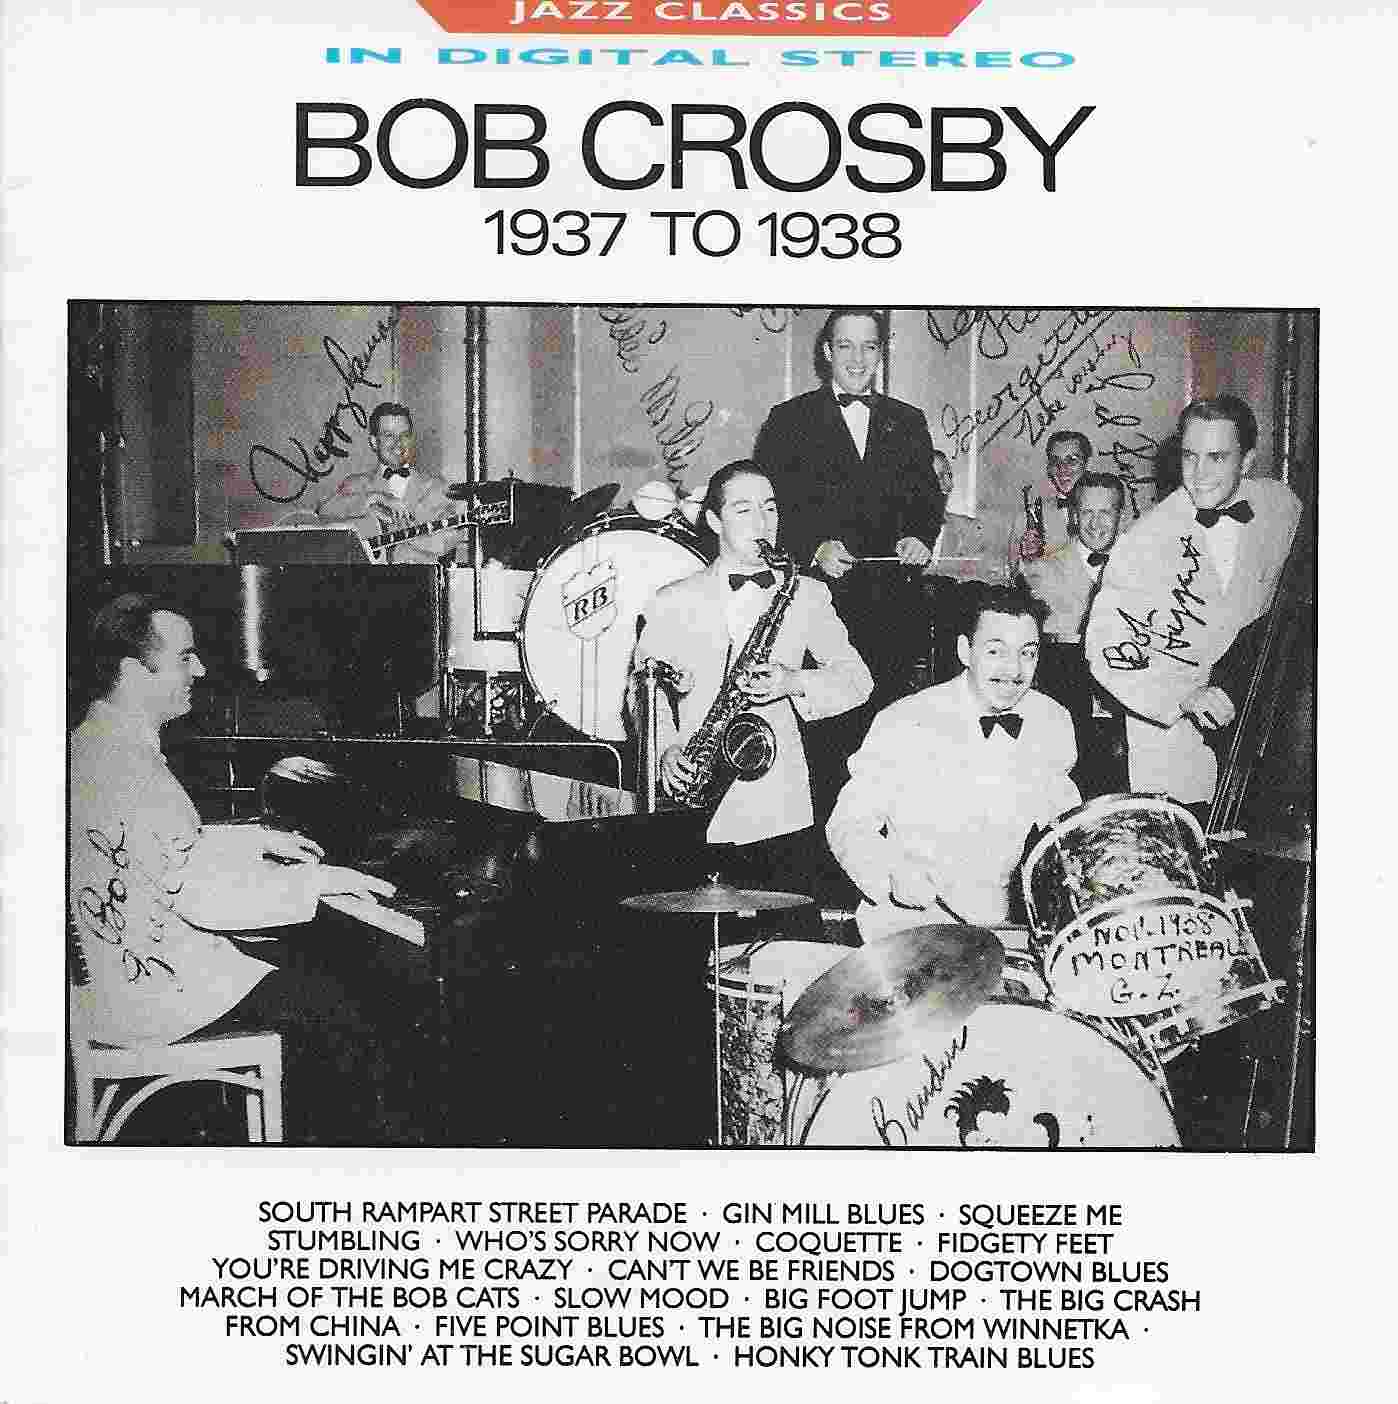 Picture of Jazz classics - Bob Crosby by artist Bob Crosby from the BBC cds - Records and Tapes library